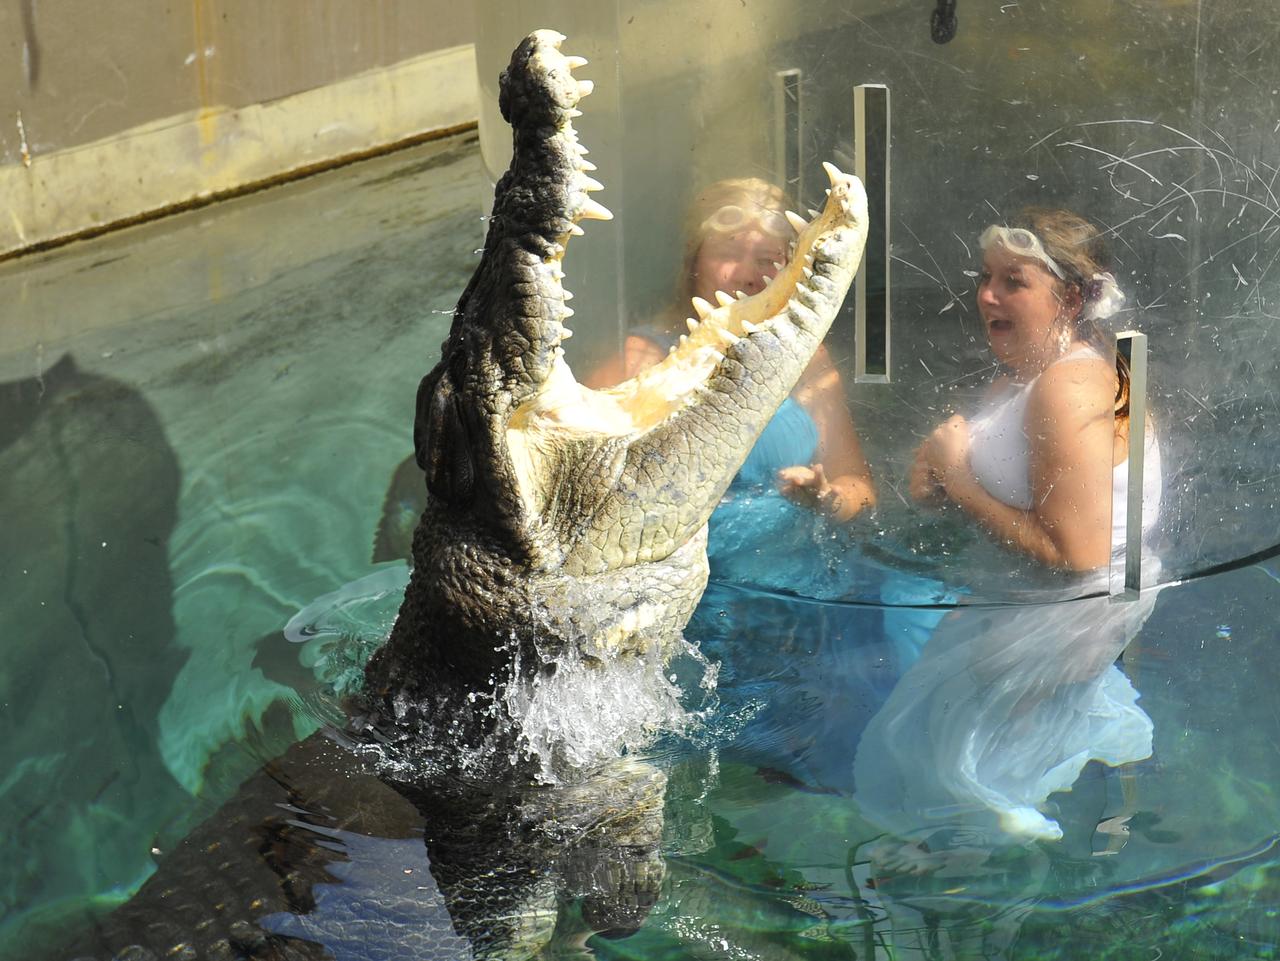 Timika King (17) and Remy Fowler (18) in the cage of death at Crocosaurus Cove. The two schoolies are wearing their formal dresses to celebrate the end of year 12.